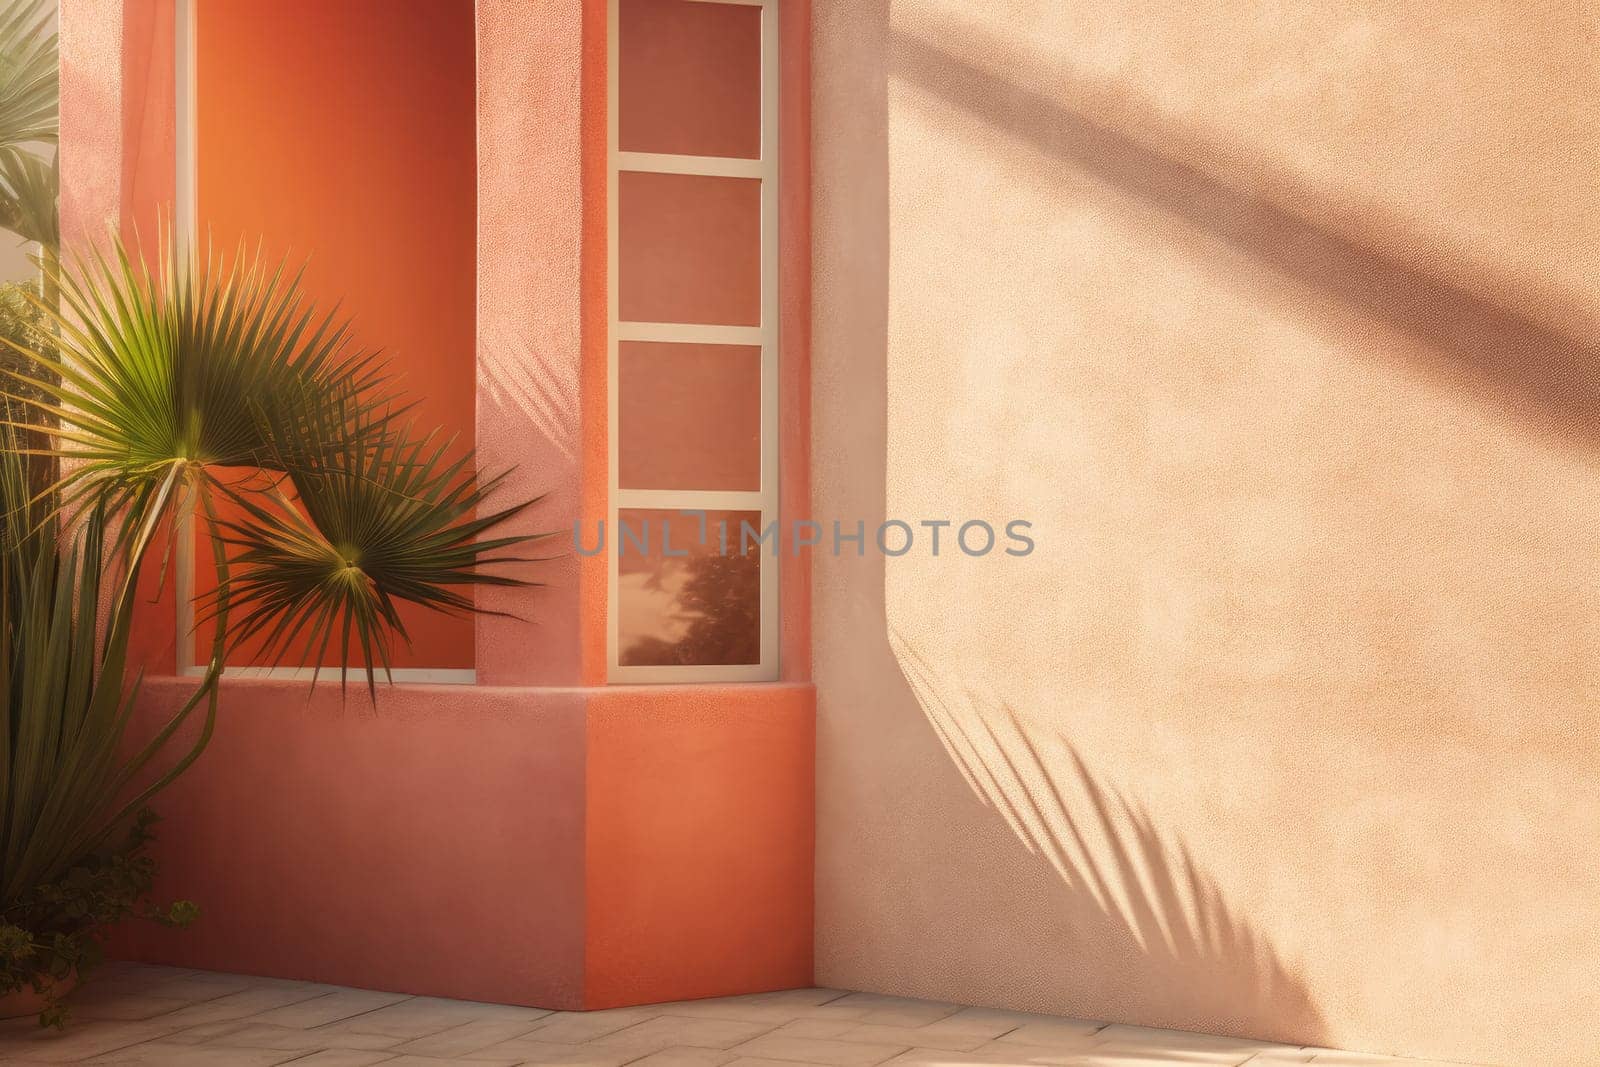 Plastered wall, plant and shadows by cherezoff